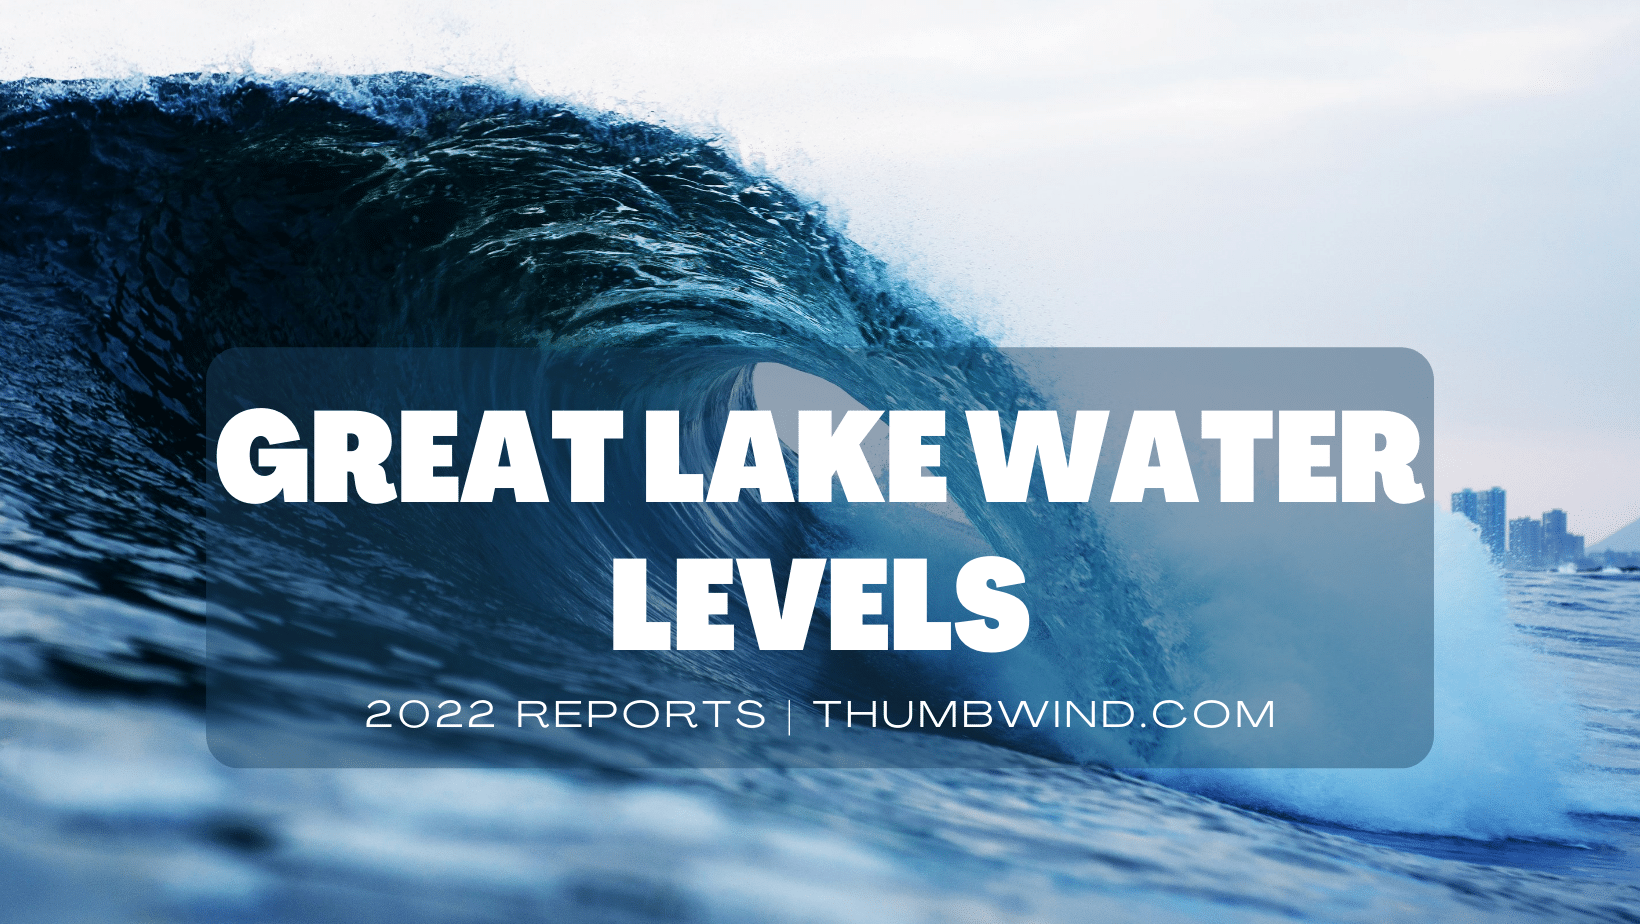 Great Lakes Water Levels 2022